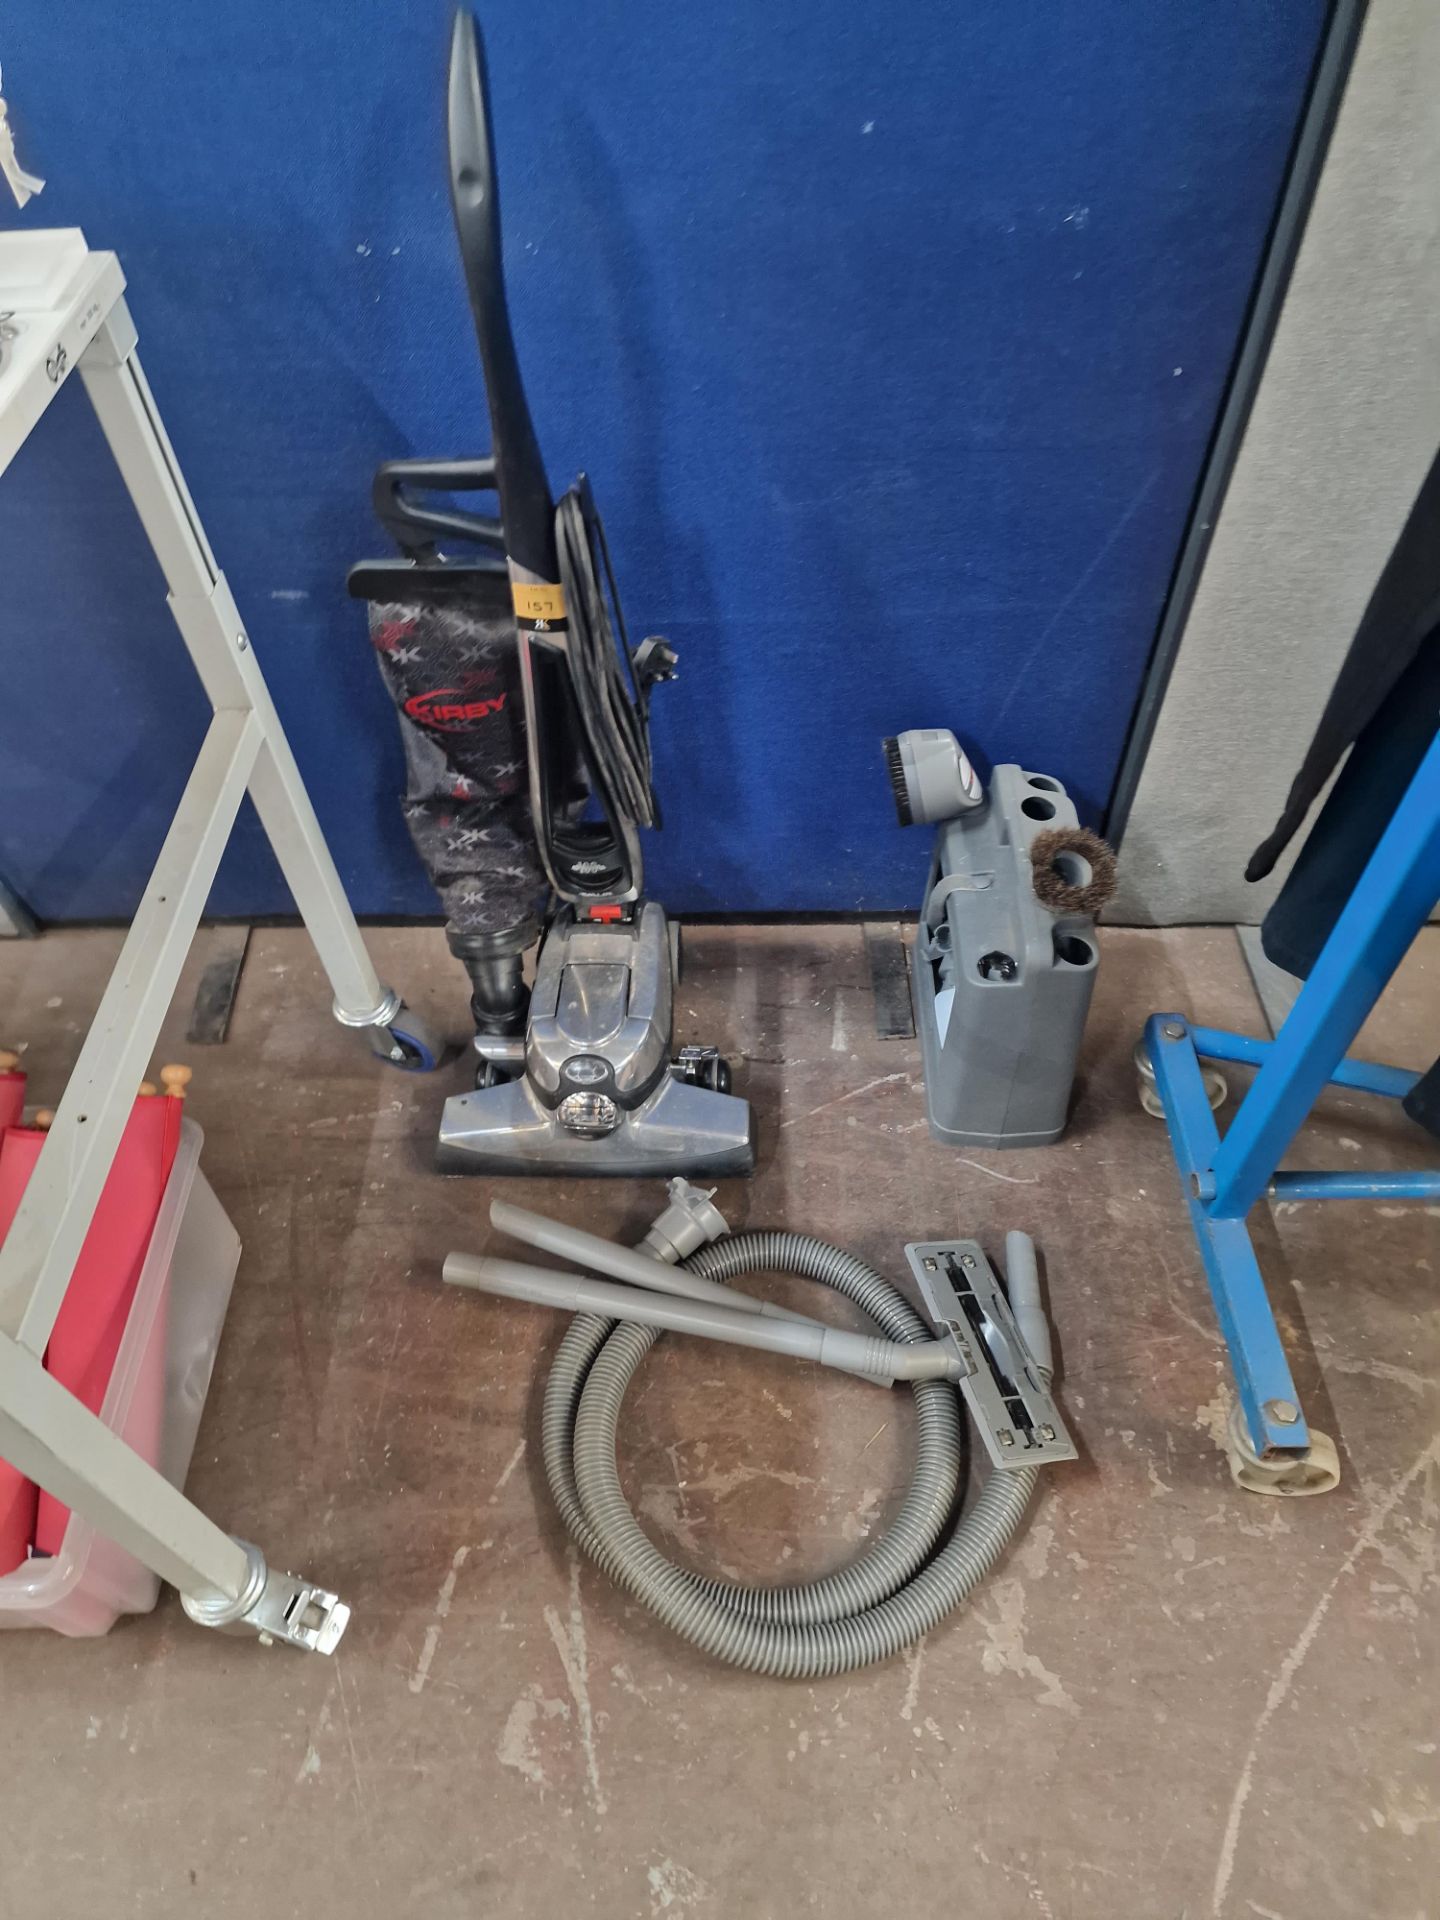 Kirby model G10E Sentria vacuum cleaner, including various accessories and stand for use with same,